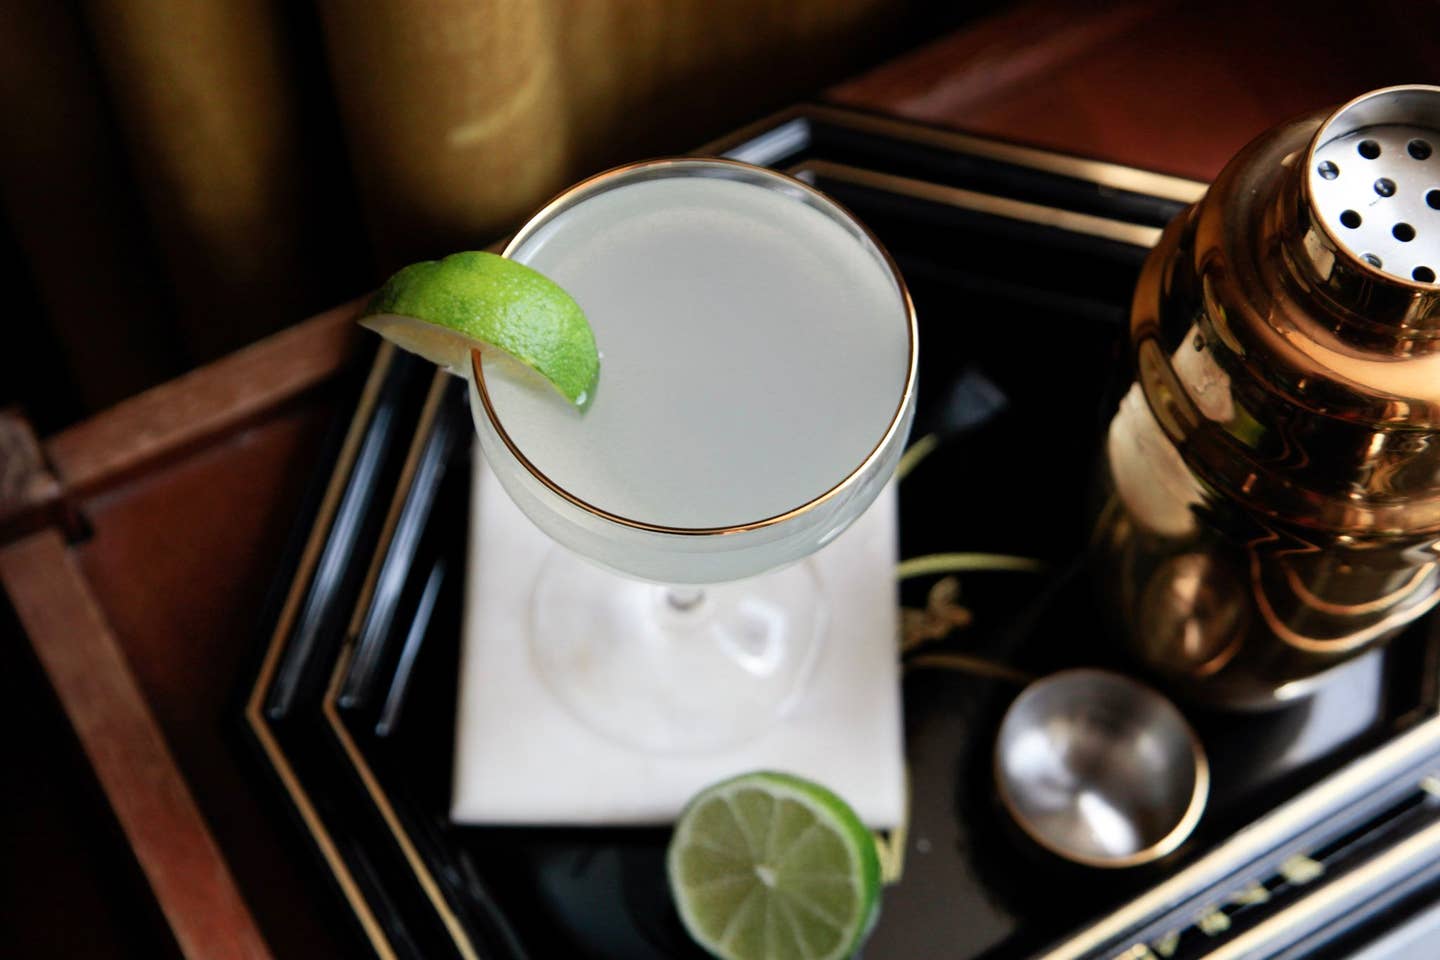 The Gin Gimlet Is Deceptively Simple—Here’s How to Make Each Ingredient Shine